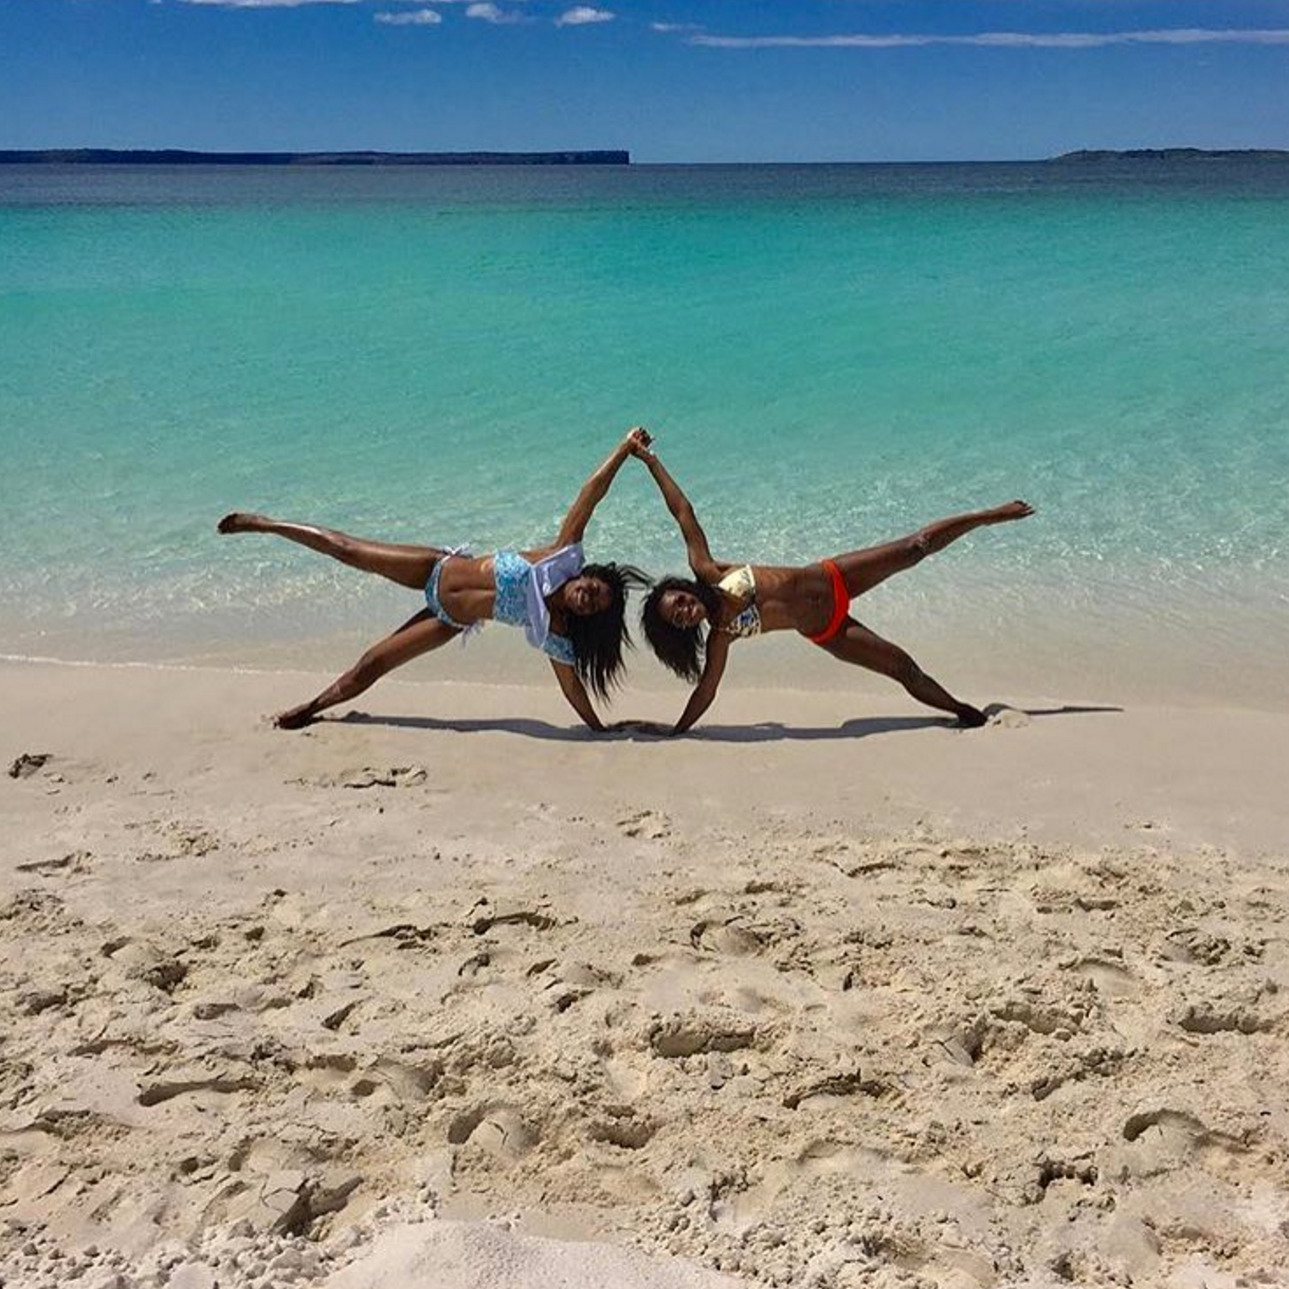 The 15 Best Black Travel Moments You Missed This Week: Black Girl Magic In The Bahamas
 
